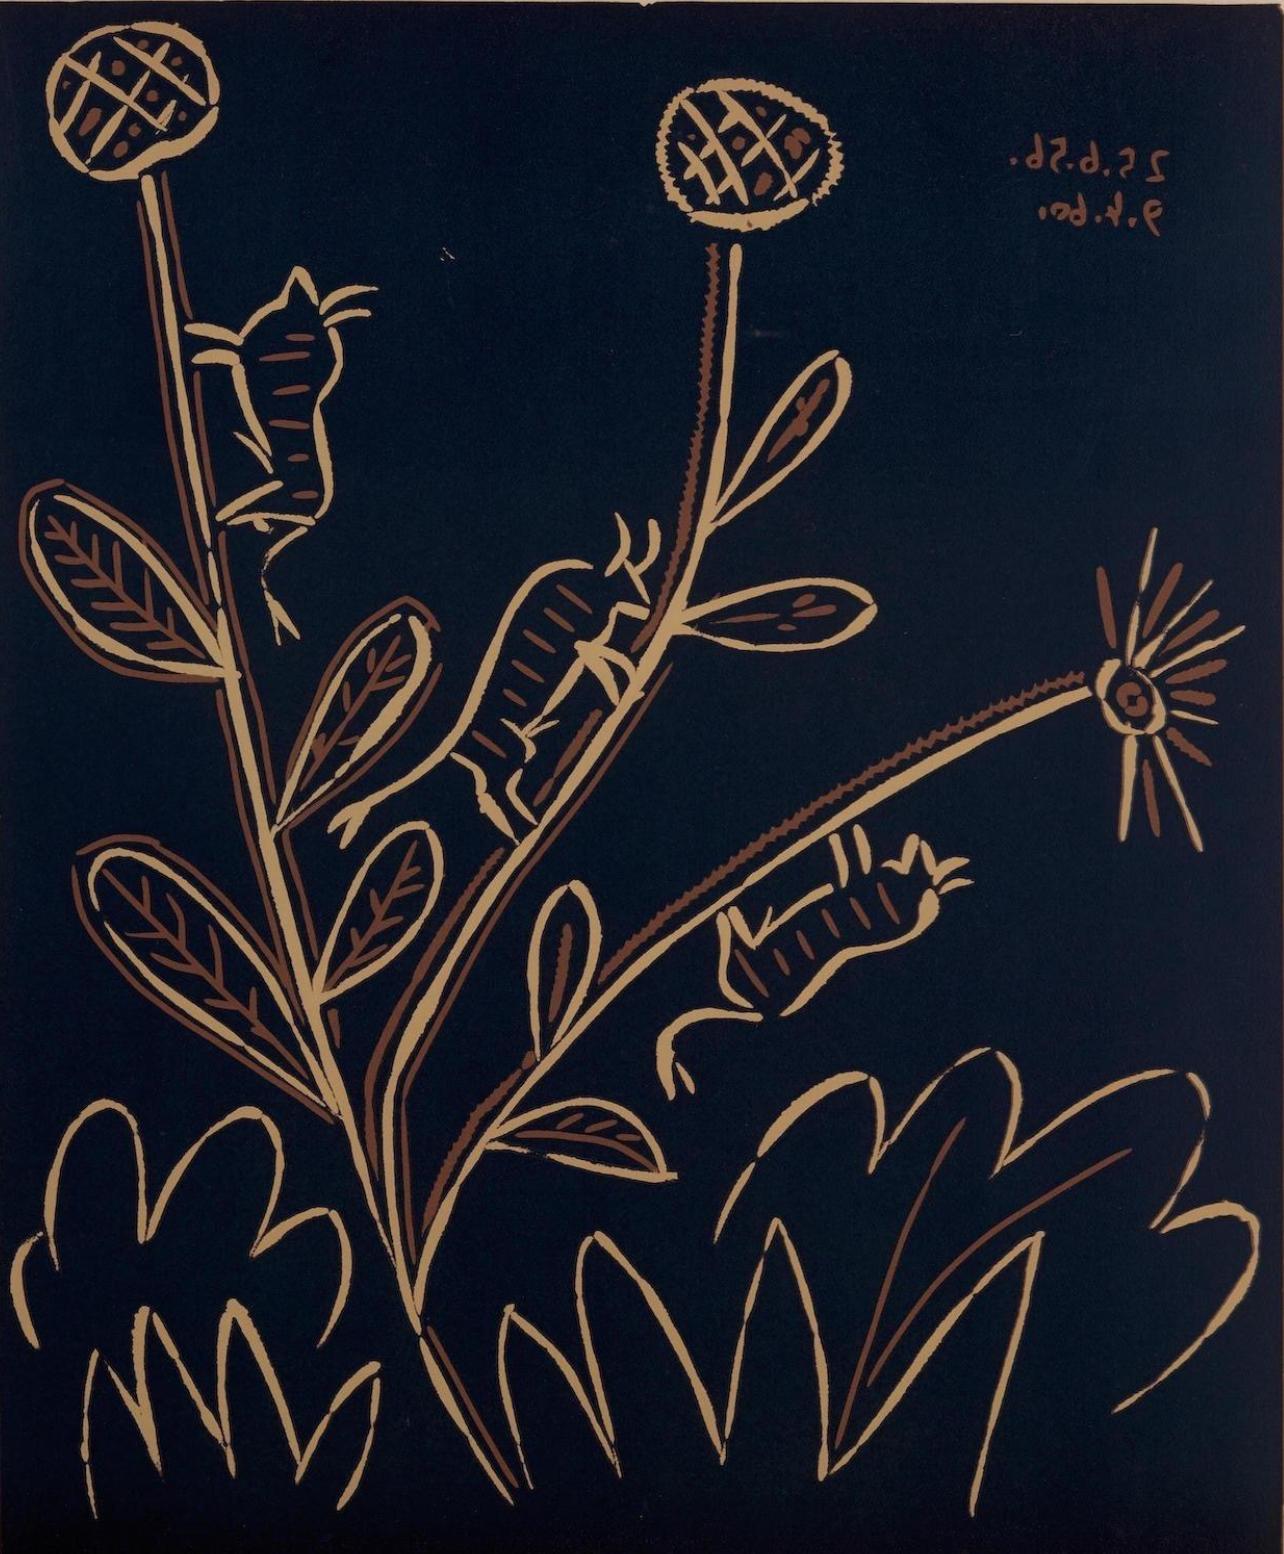 Picasso, Plant with Little Bulls, Pablo Picasso-Linogravures (after)